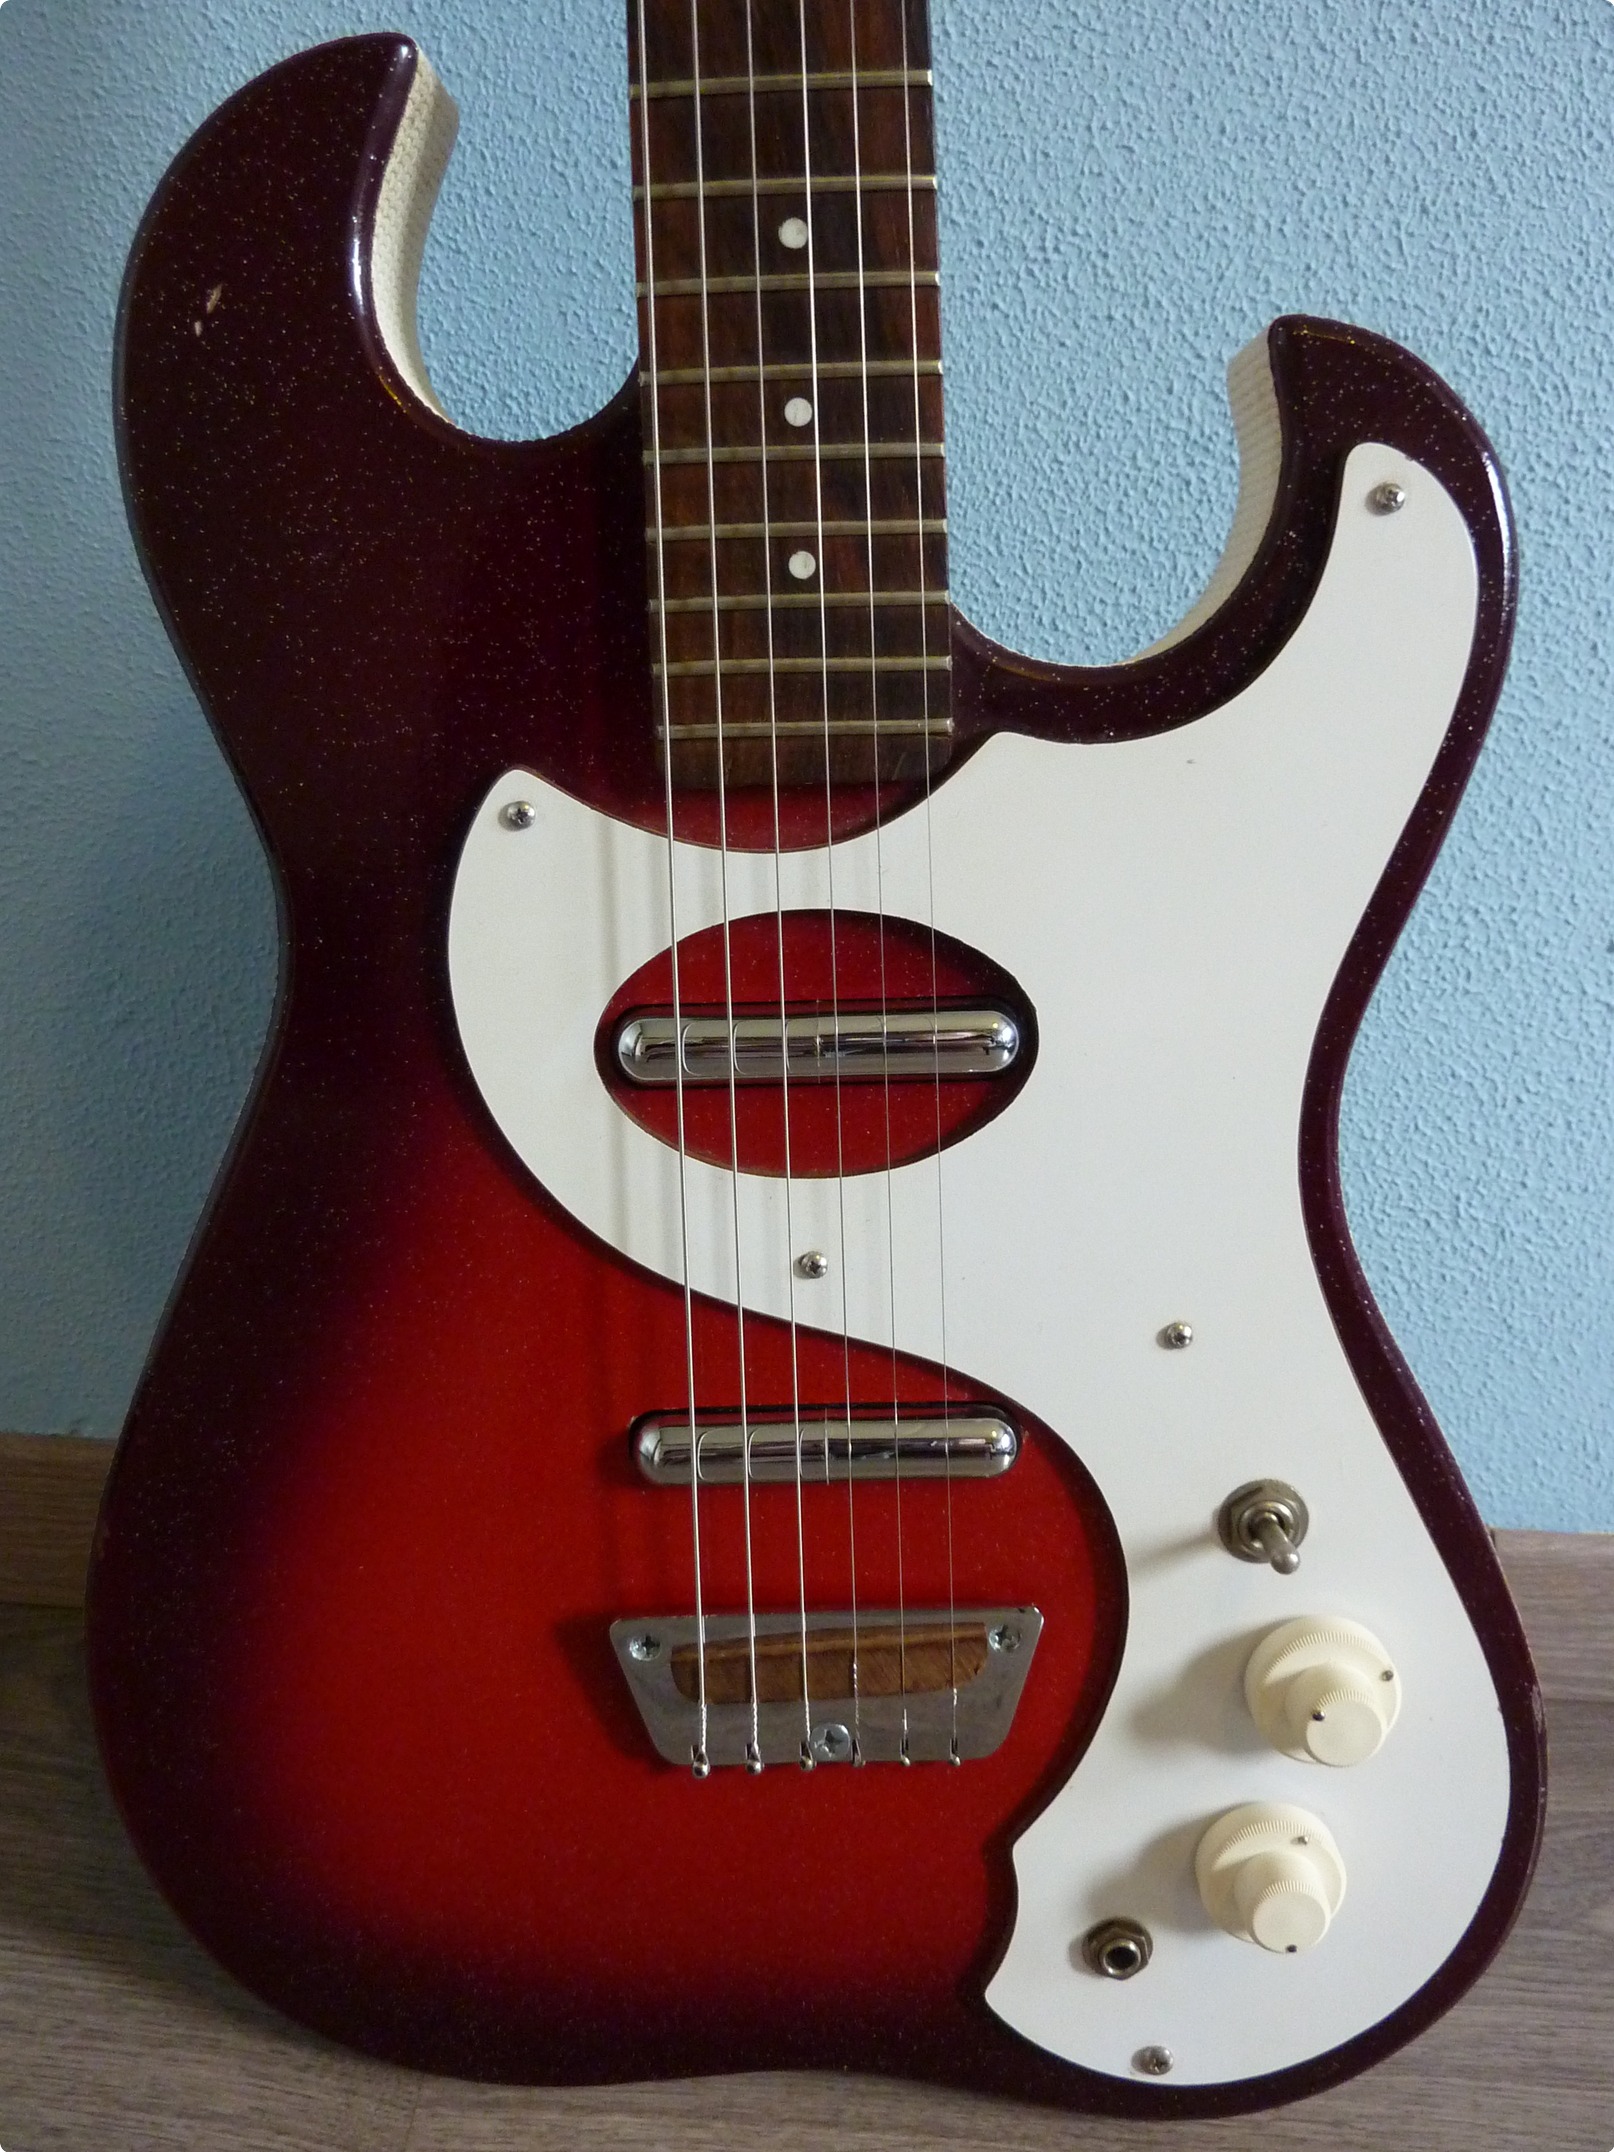 silvertone-1457-amp-in-case-1963-red-sparkle-guitar-for-sale-hender-amps